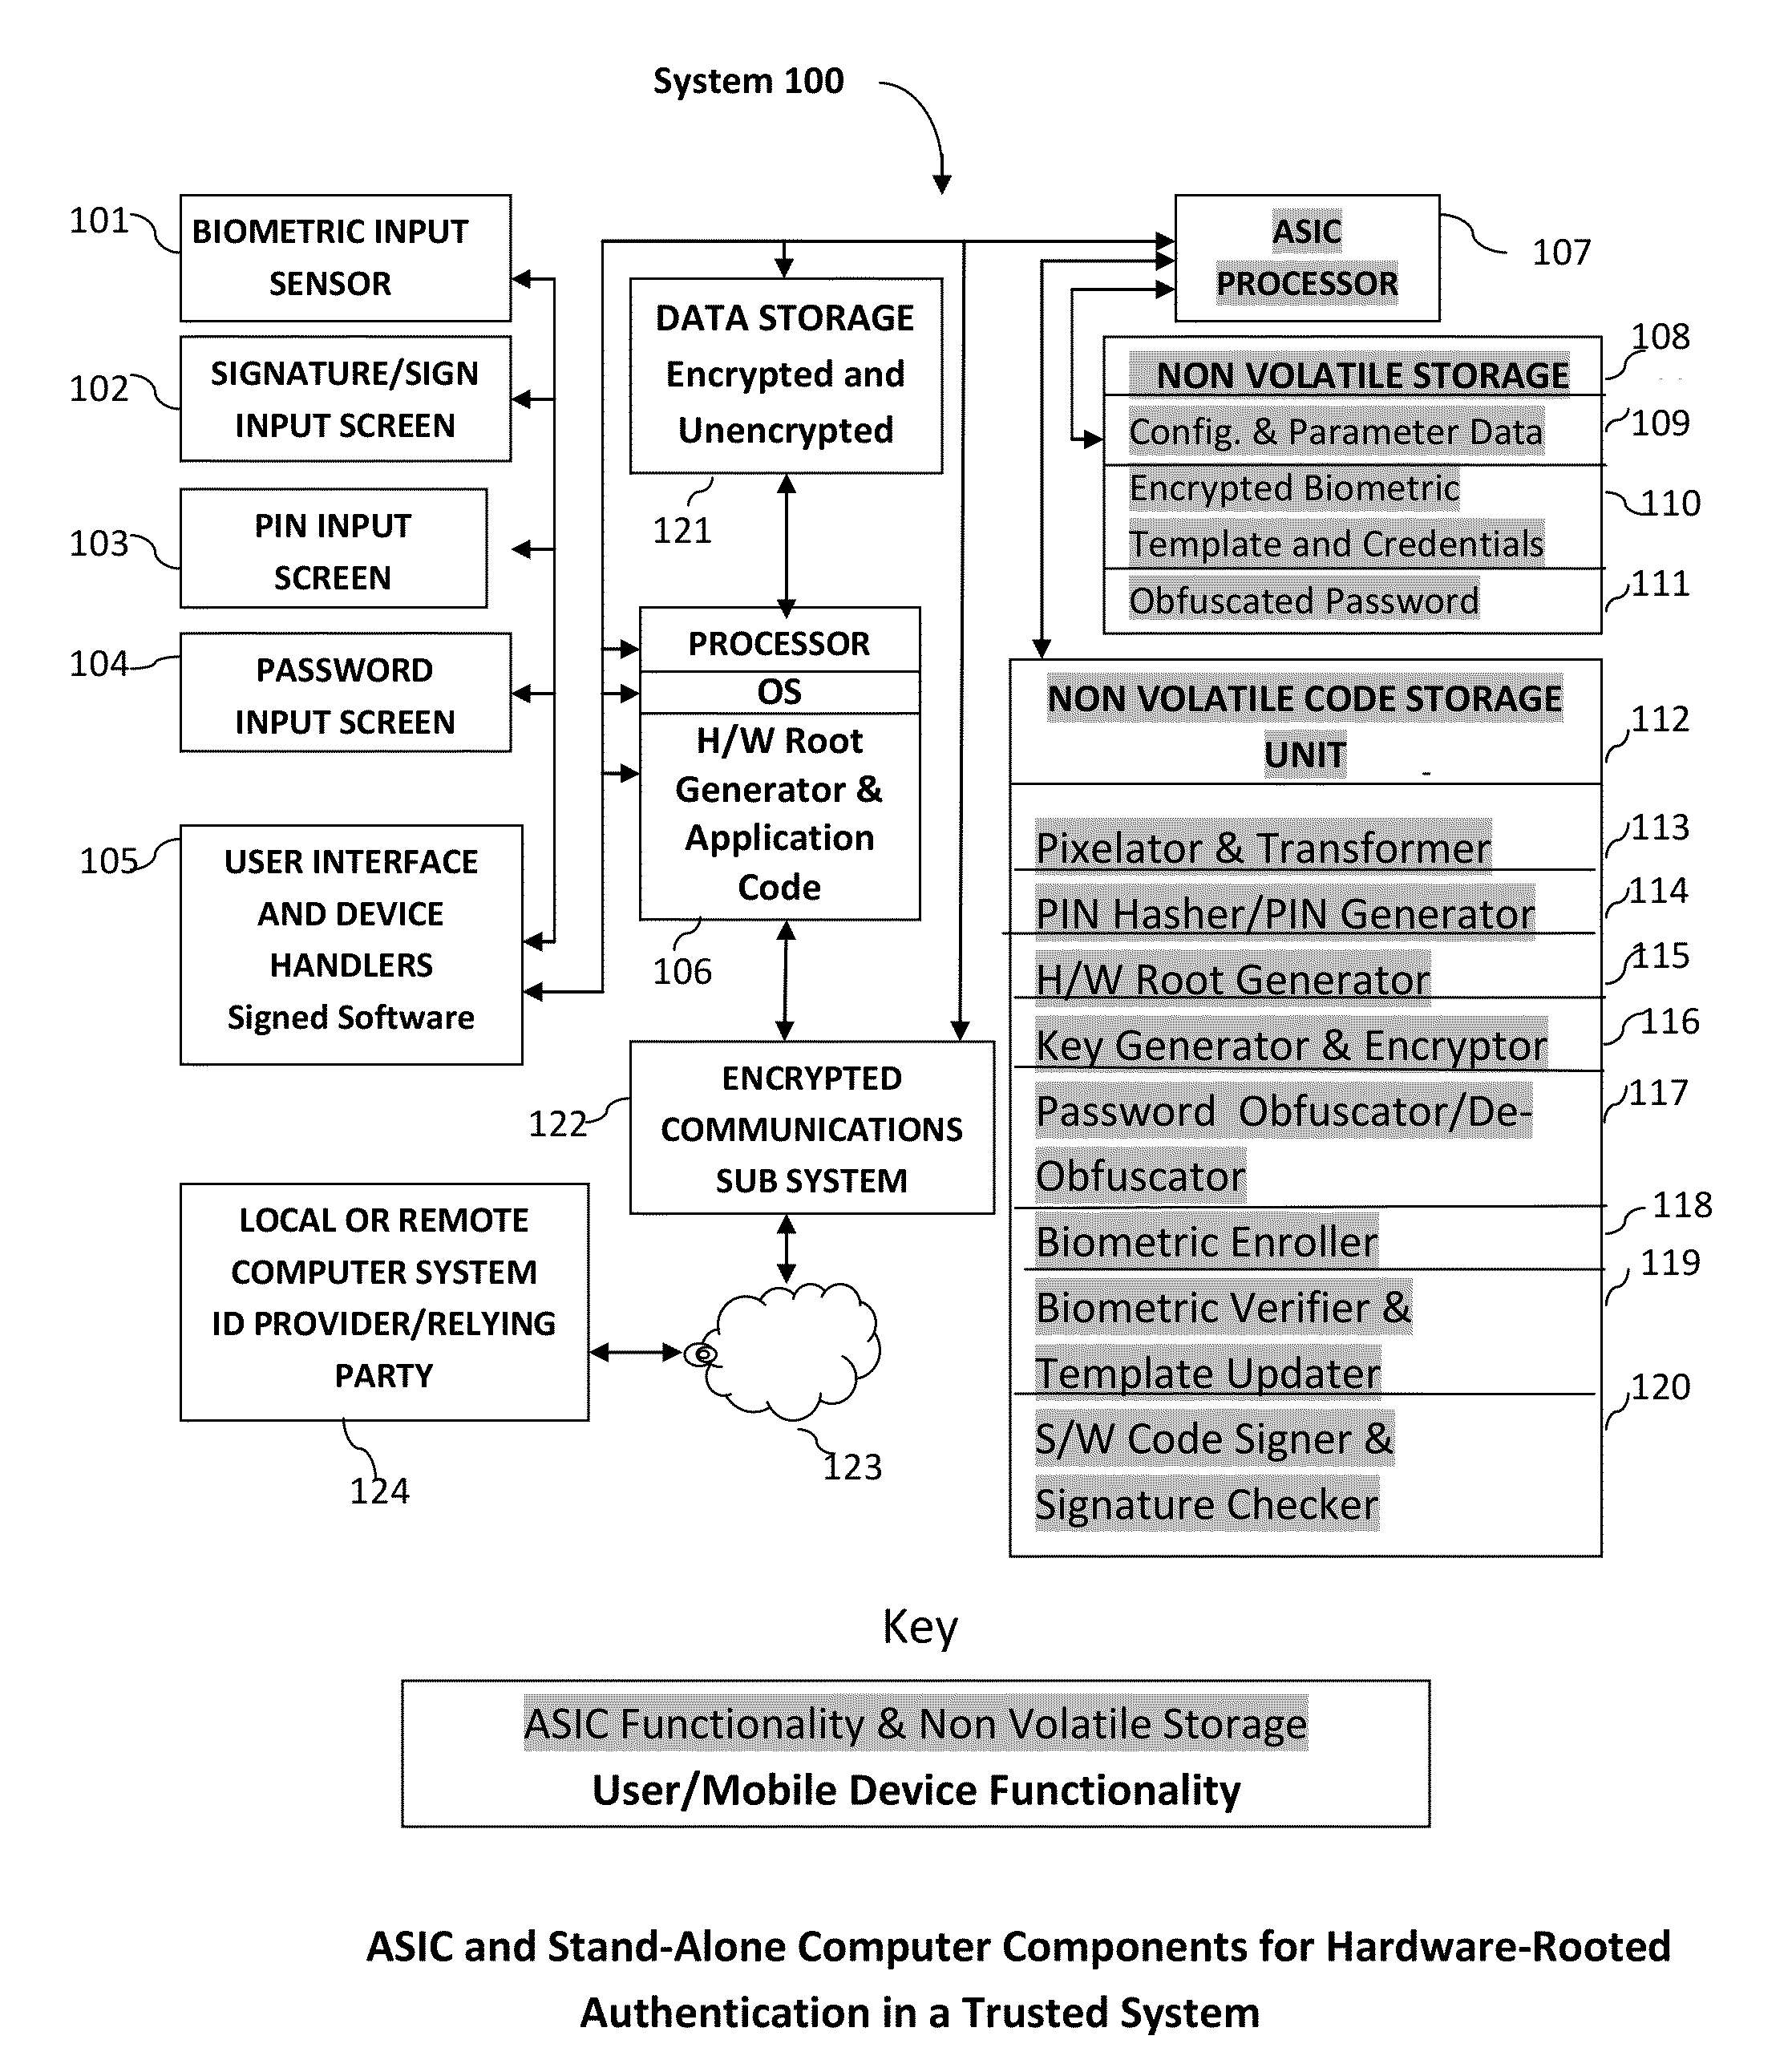 Method and System for Providing Password-free, Hardware-rooted, ASIC-based Authentication of a Human to a Mobile Device using Biometrics with a Protected, Local Template to Release Trusted Credentials to Relying Parties